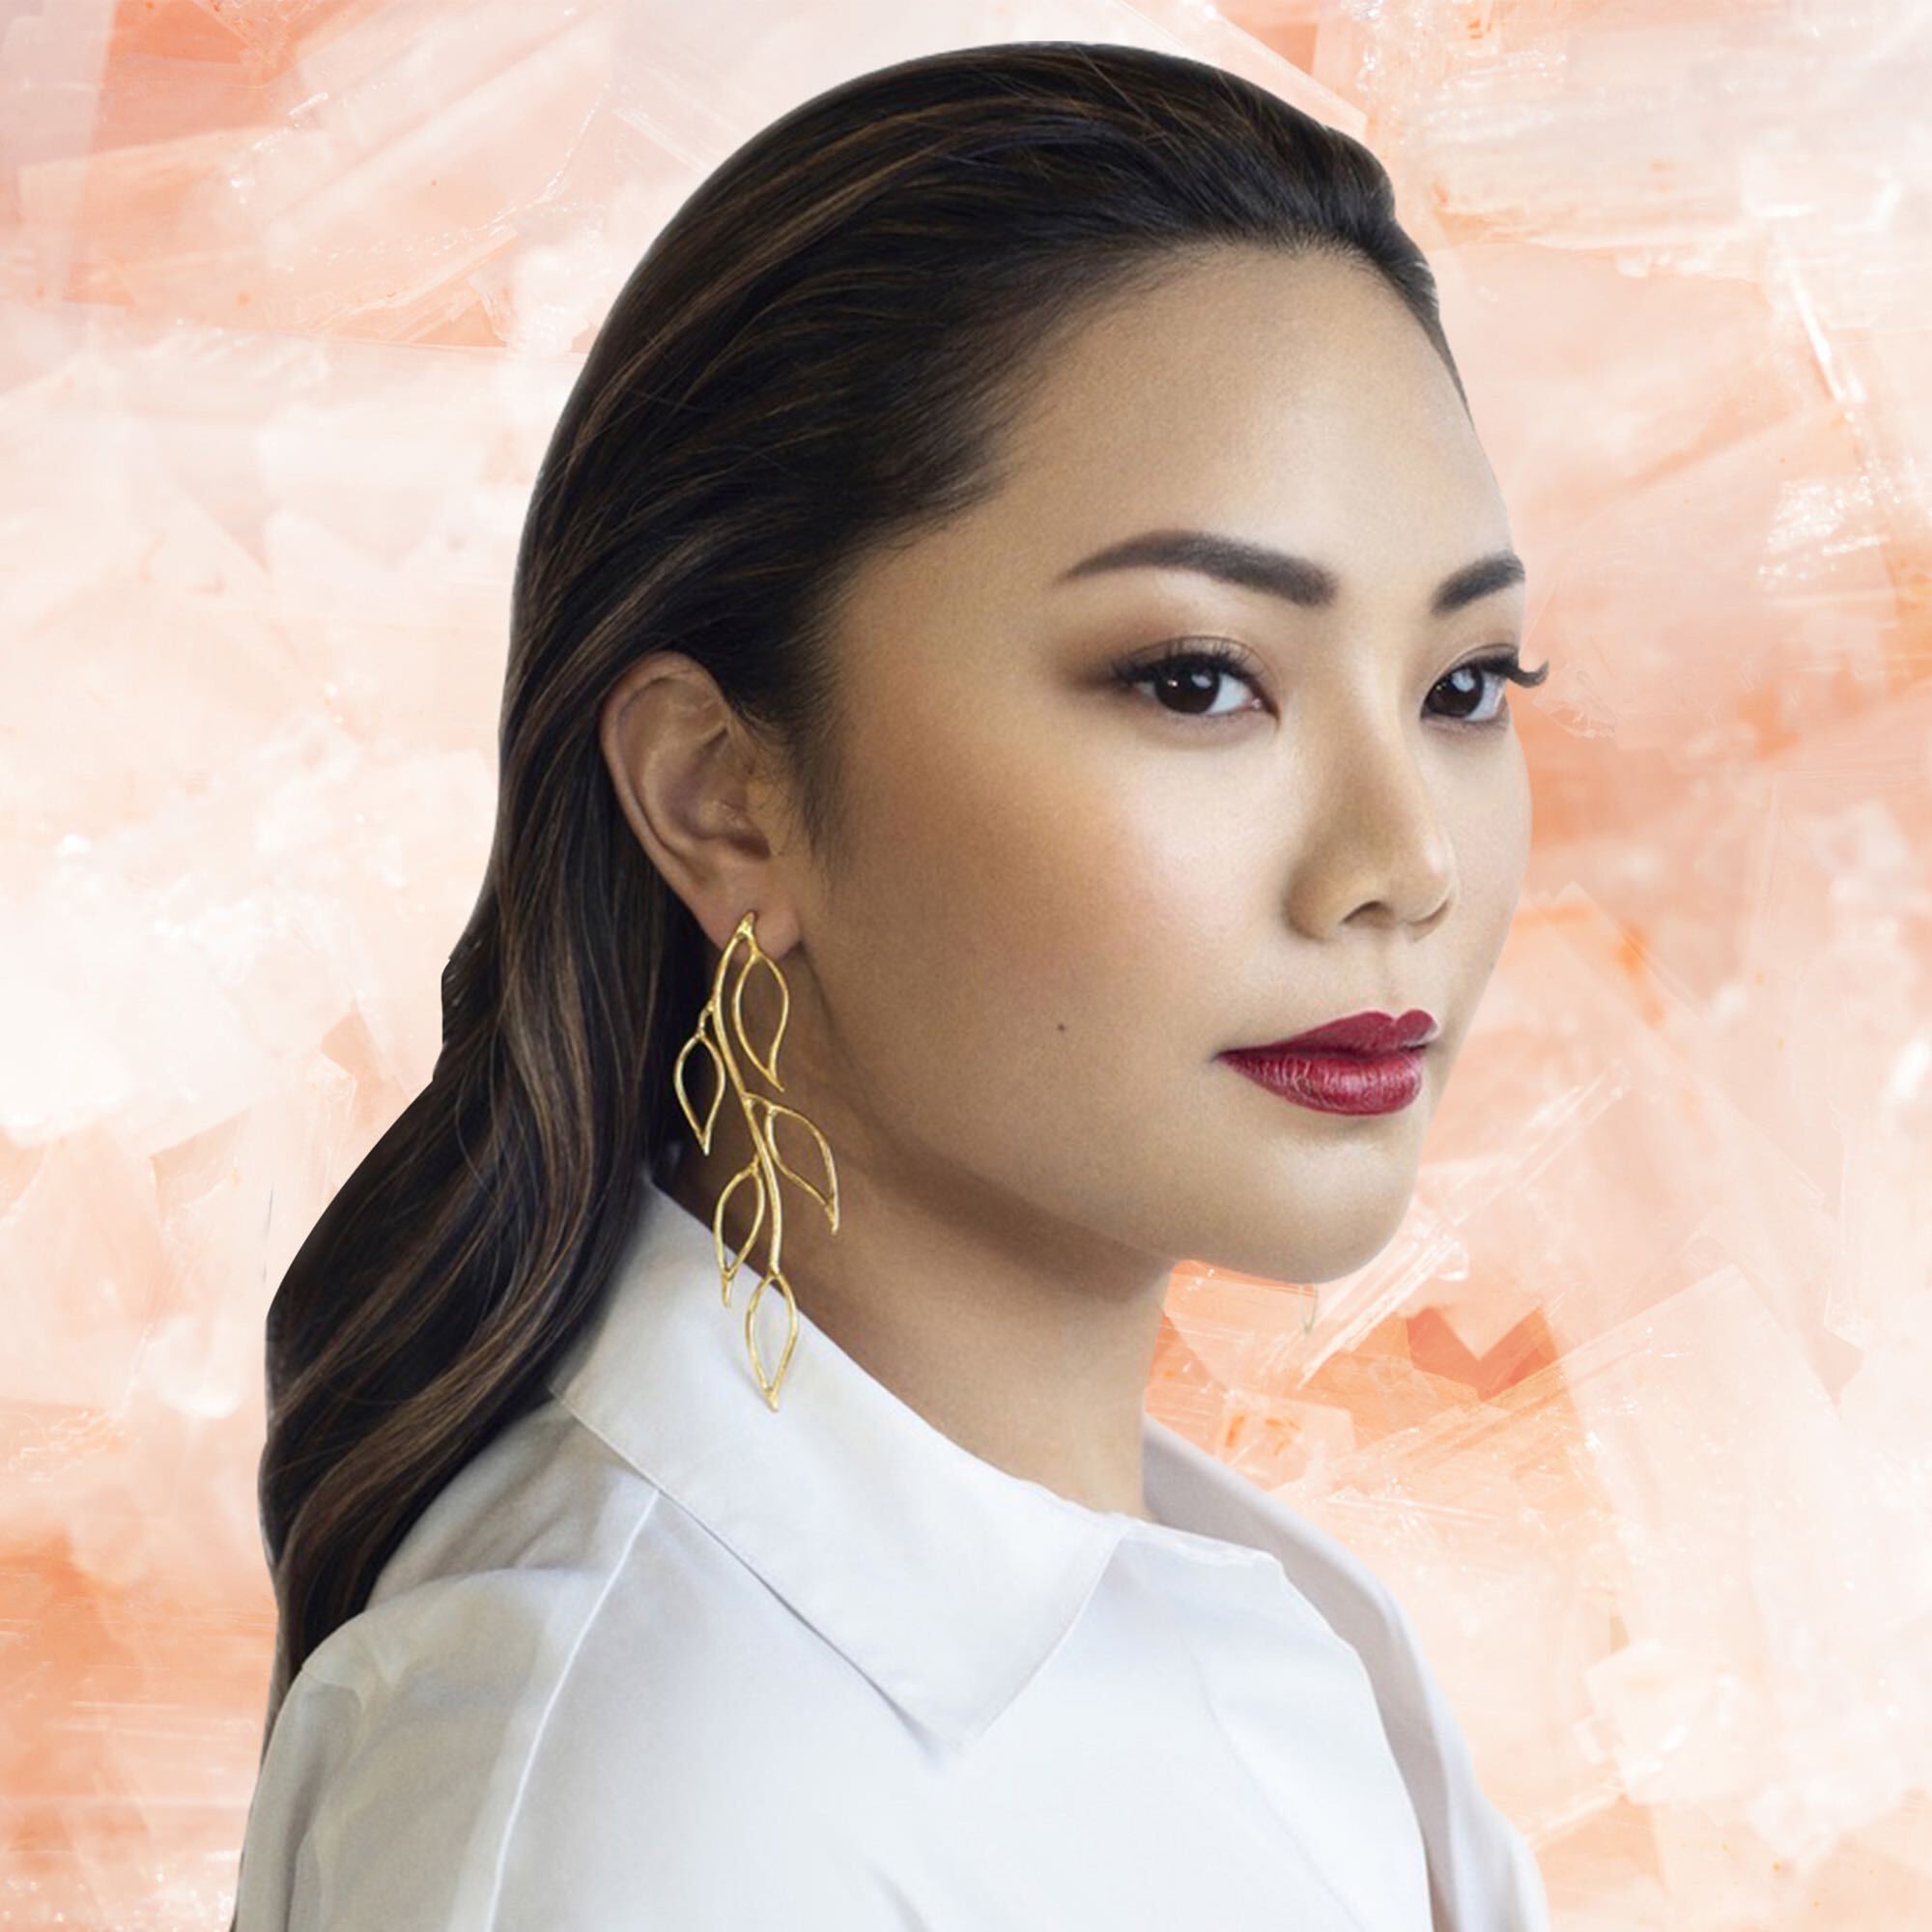 Yu-Chen Shih of Orcé Cosmetics on Creating Foundation for Asian Women | Interview